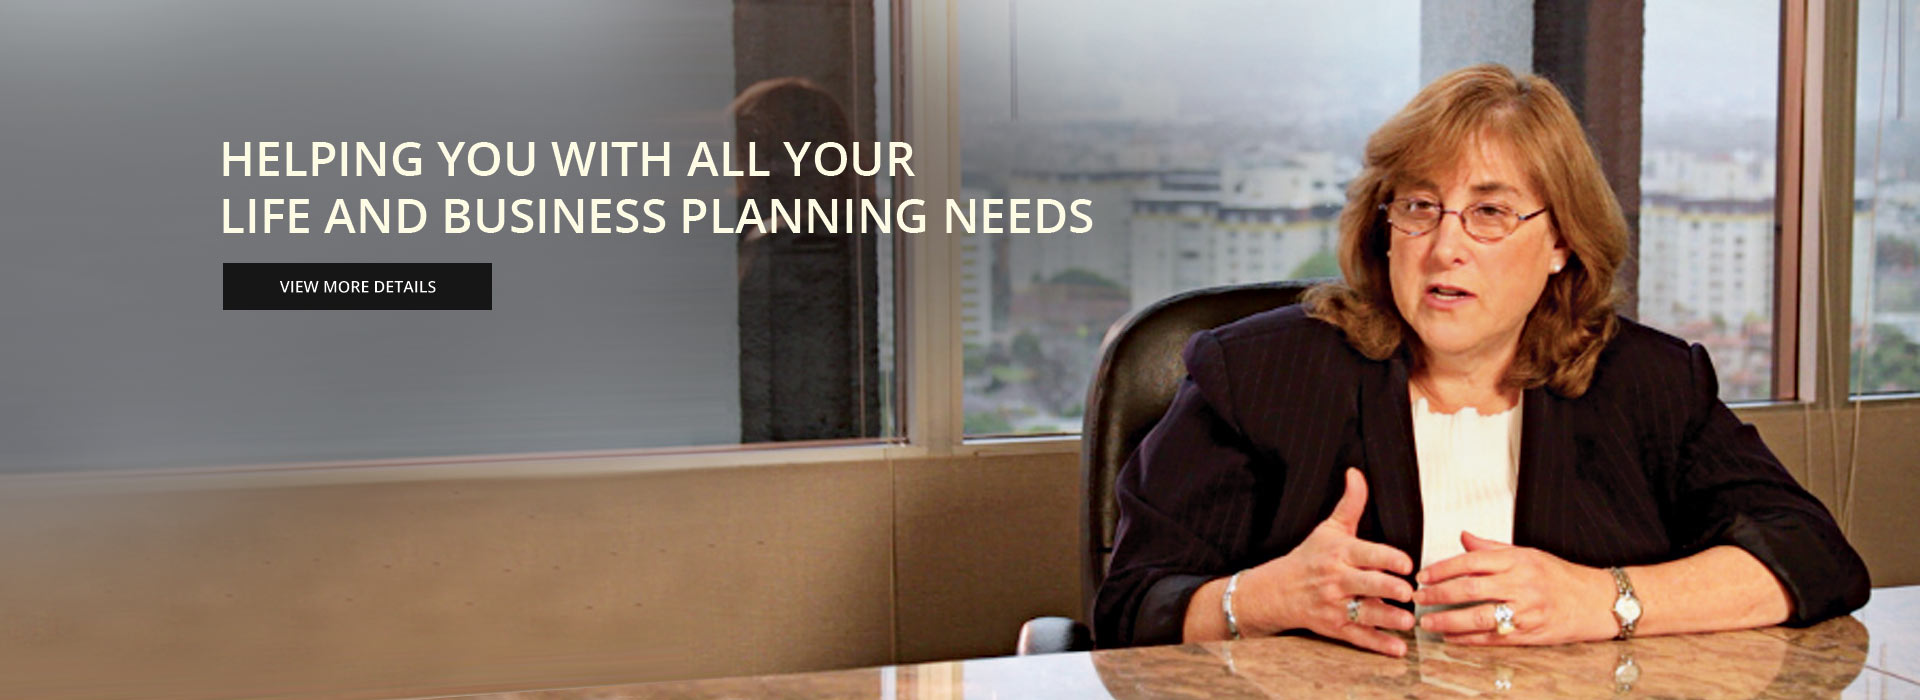 Helping you with all your Life and business planning needs